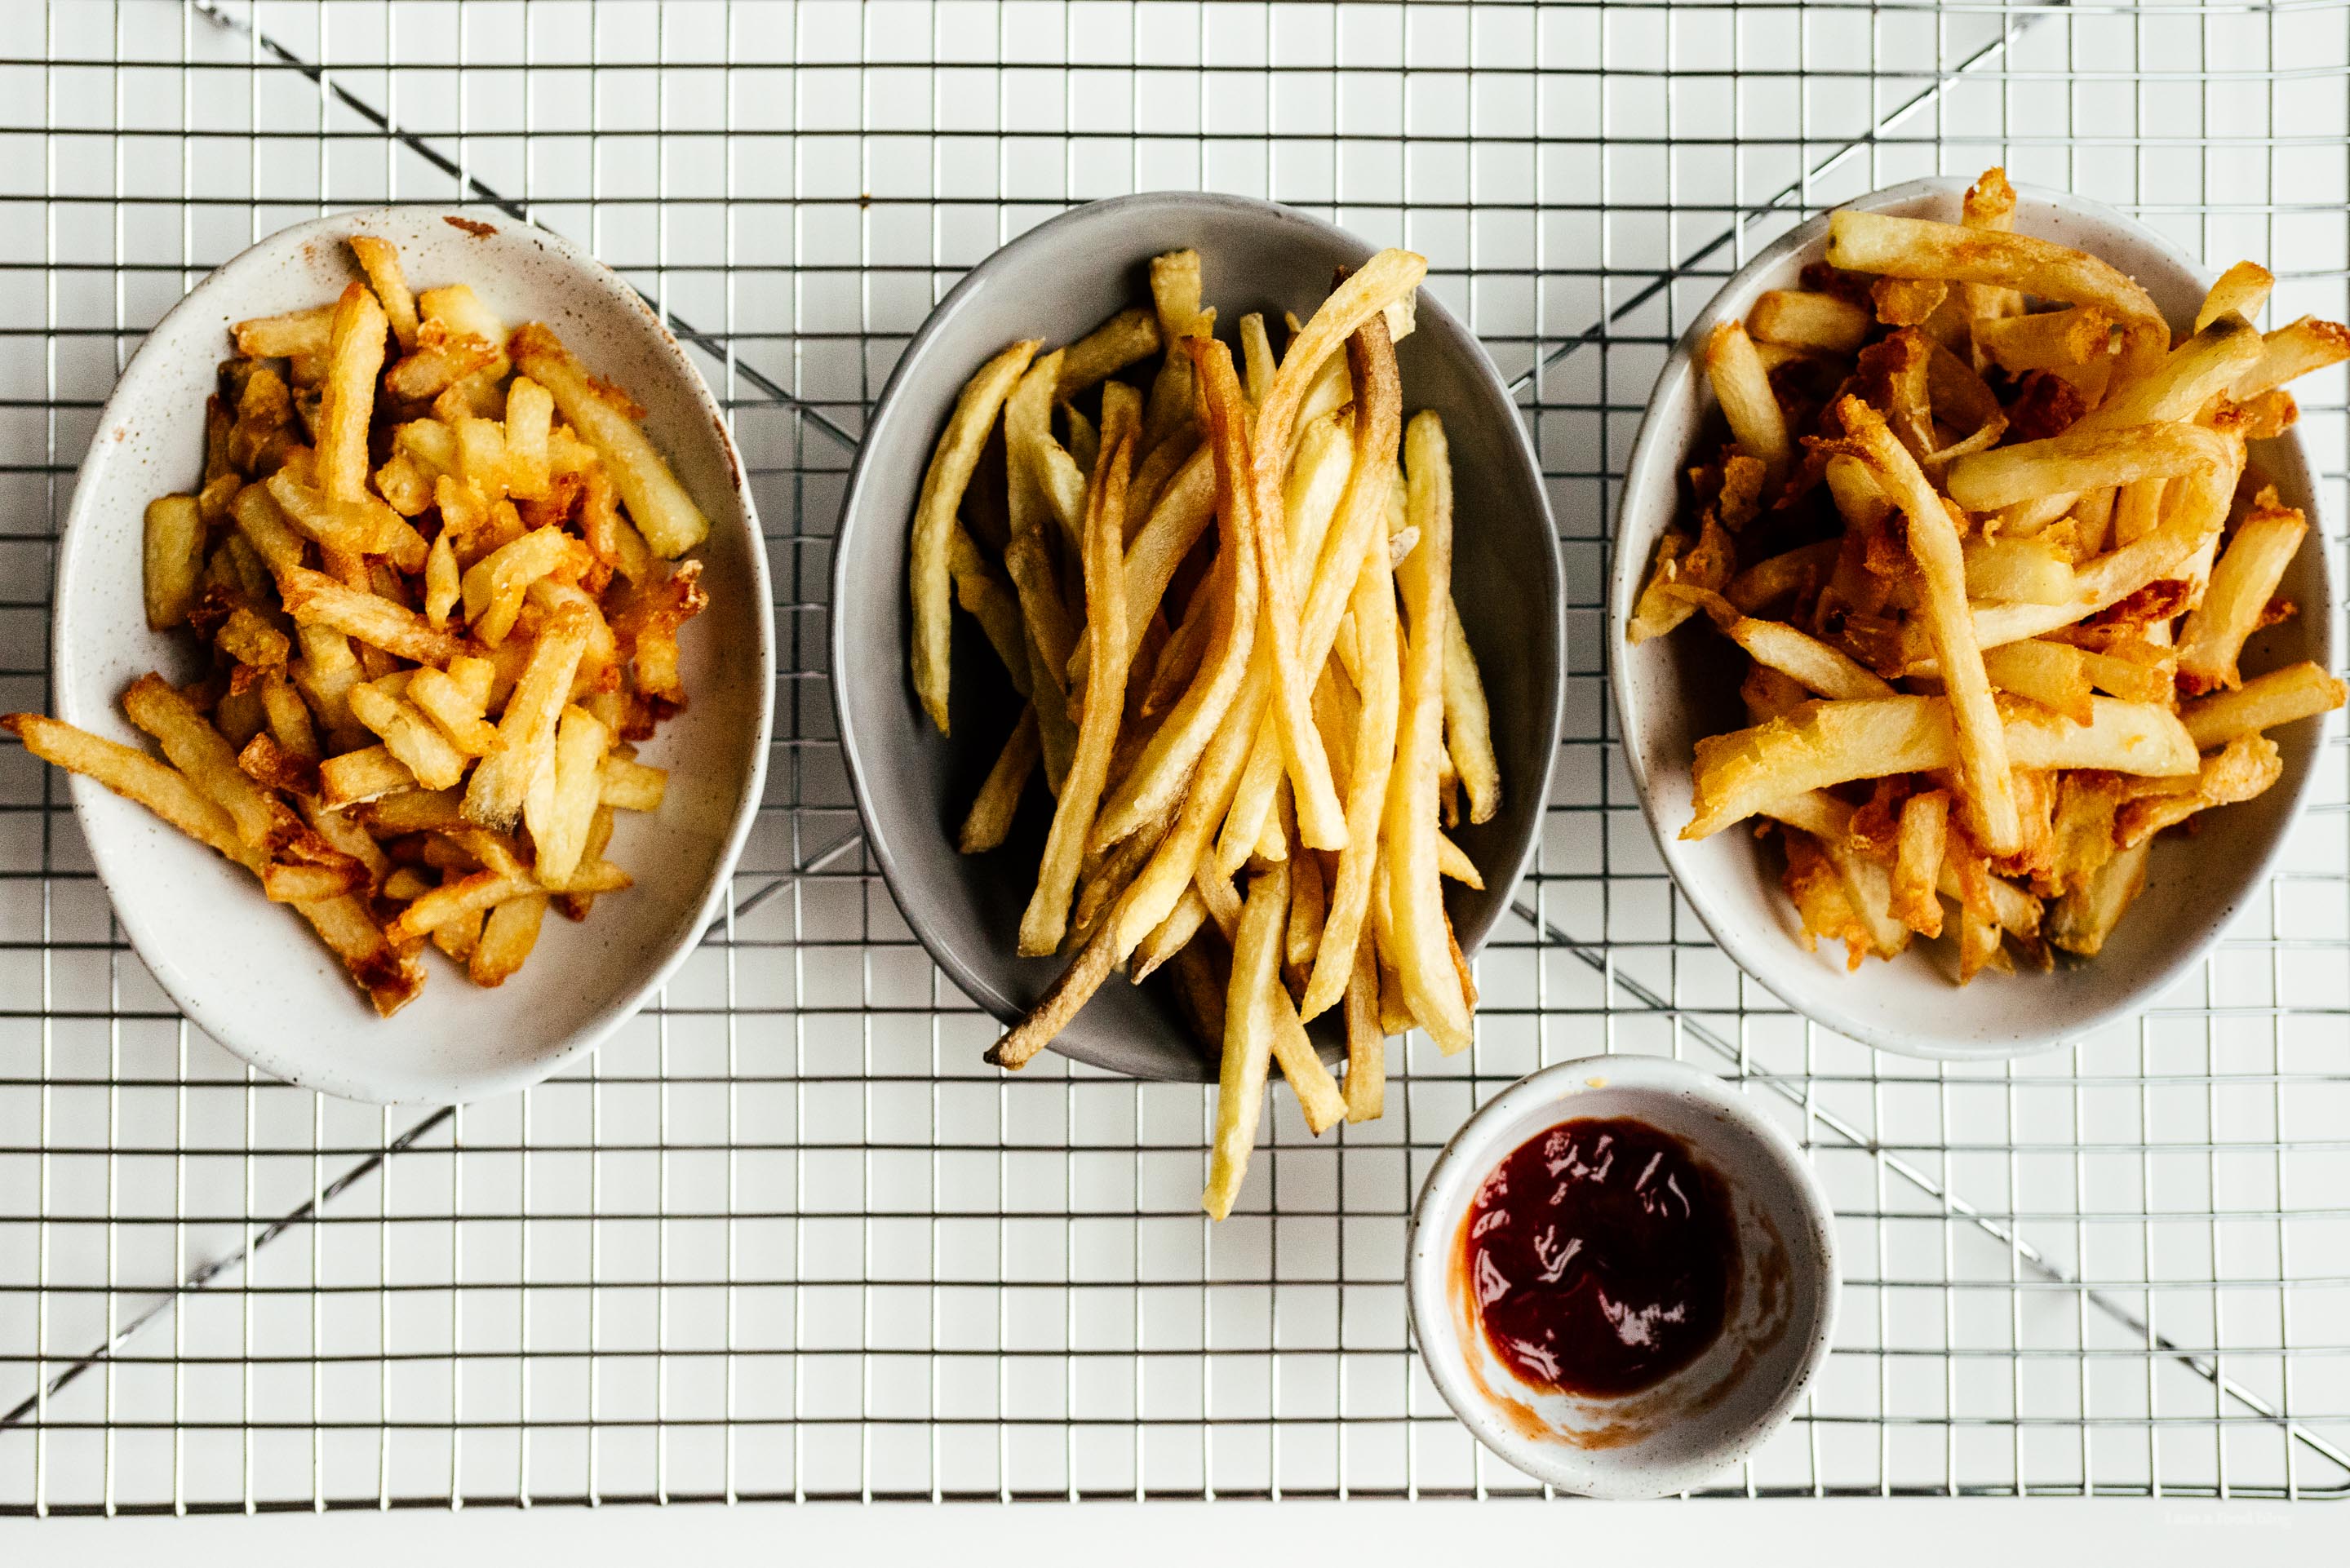 The easiest way to make french fries at home